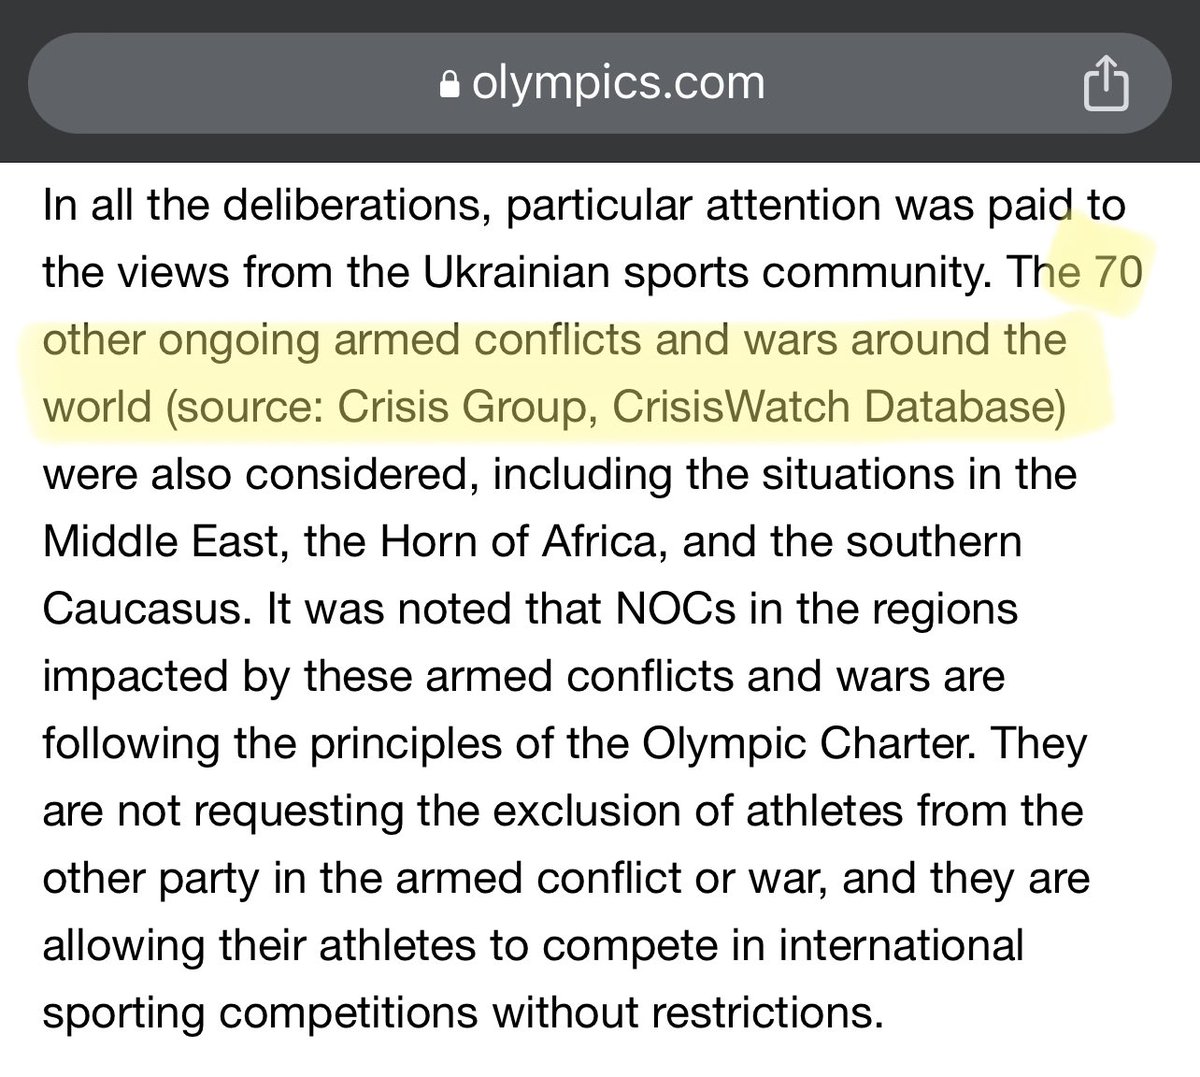 Here’s a blatant mistruth from @iocmedia.

They admit they used the CrisisWatch database to get that 70 figure - but that’s an early warning tool for risks of conflict that happens to monitor 70 countries.

I was too kind to them in earlier tweets when I said the IOC was relying…